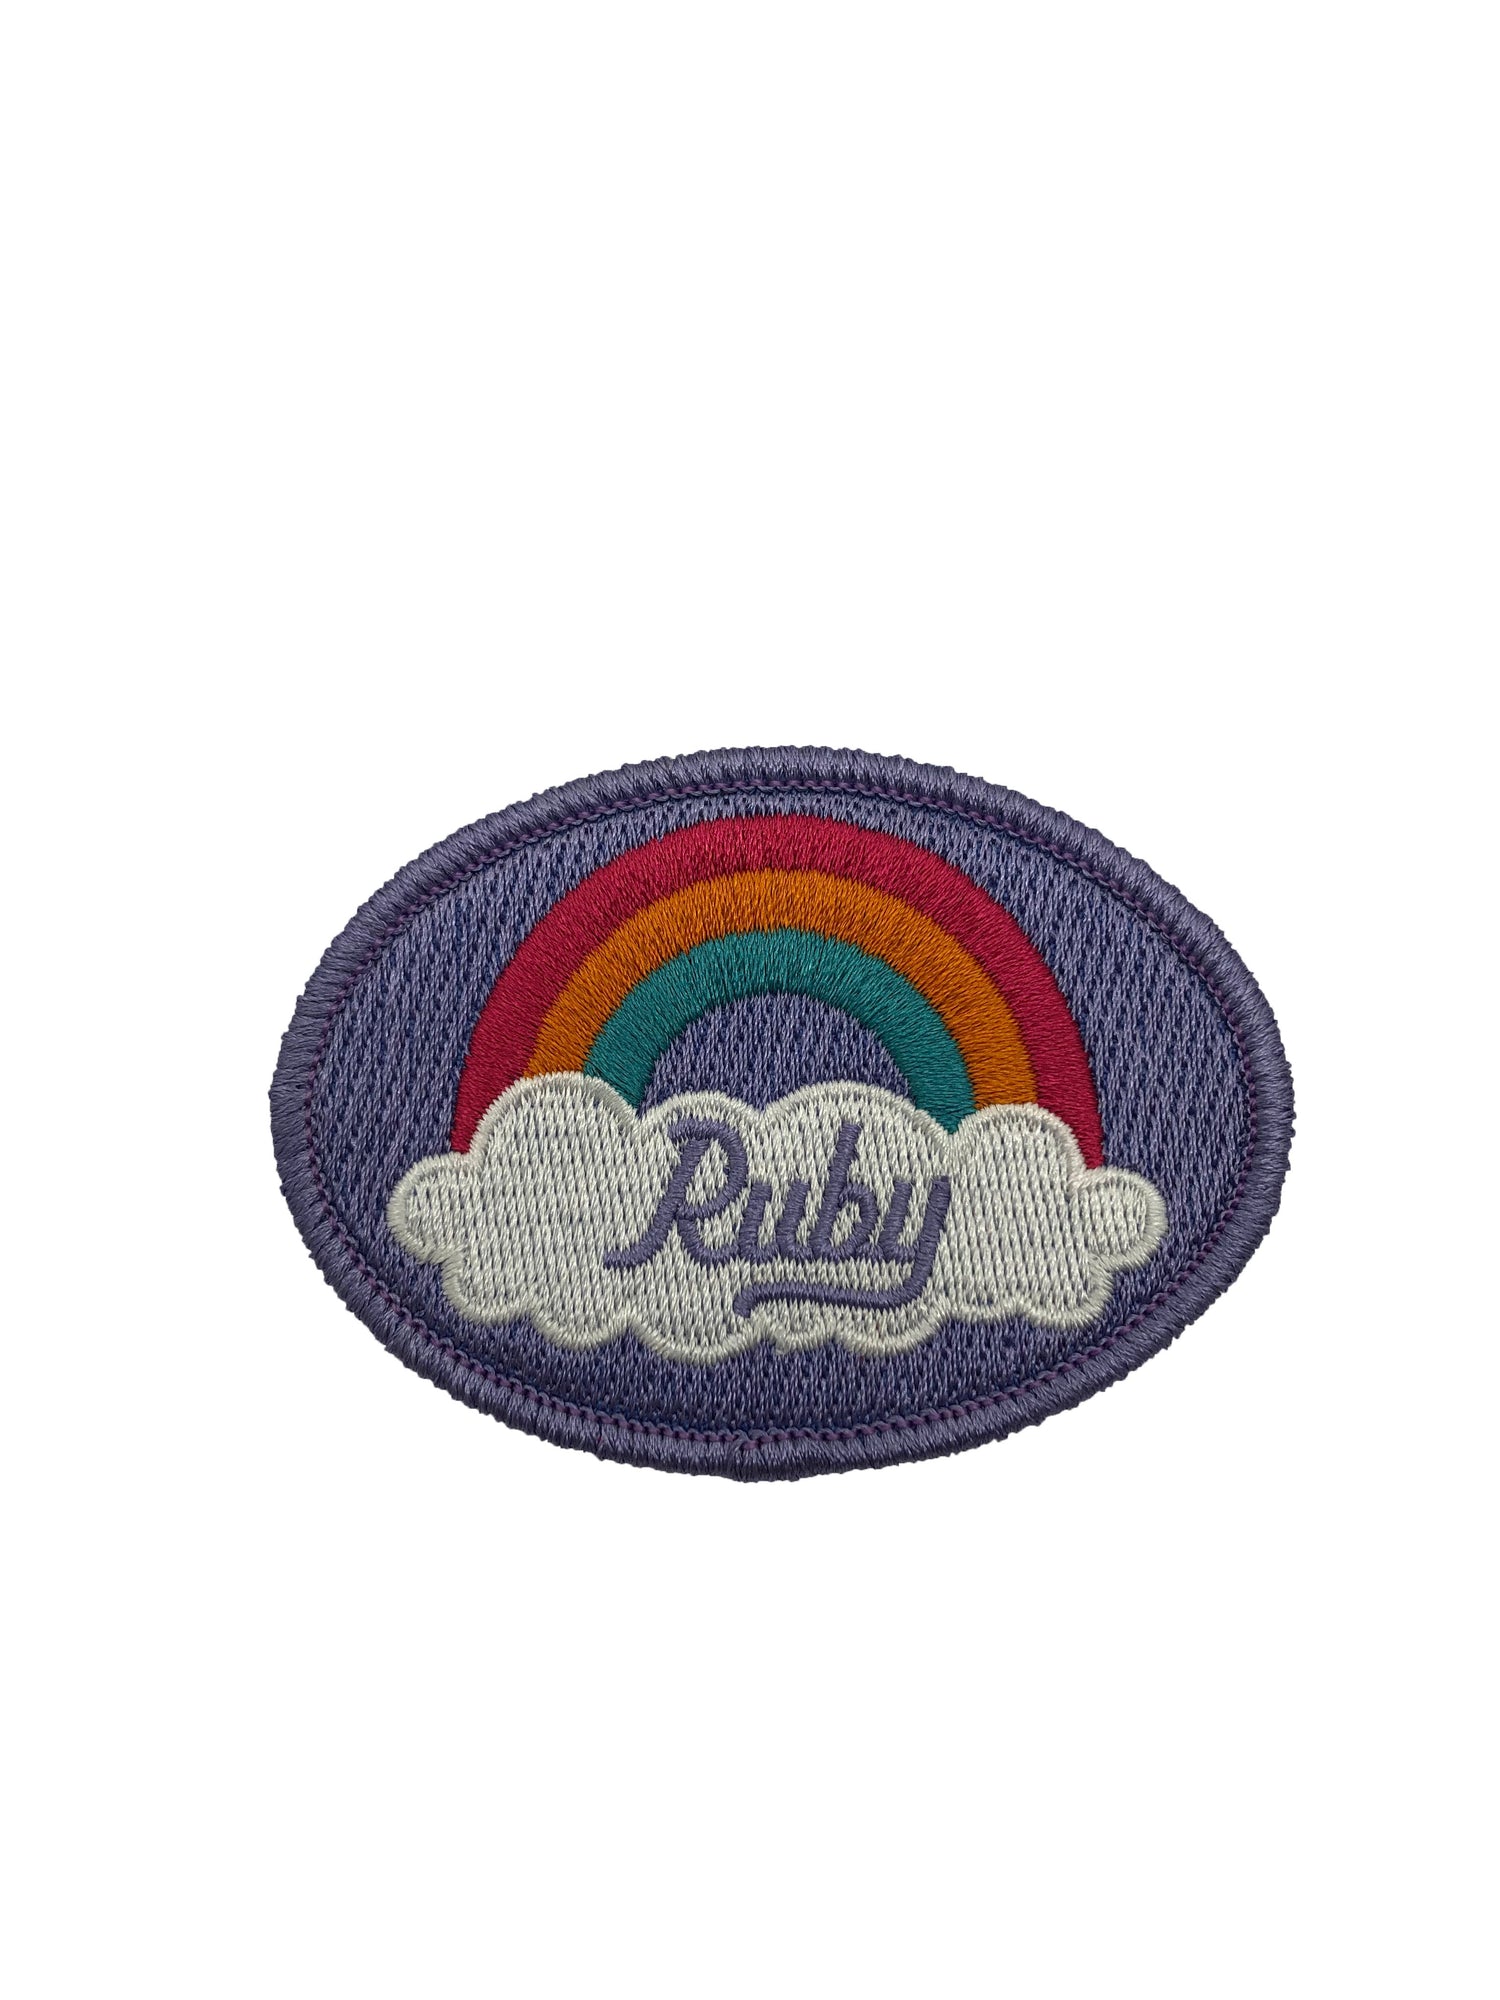 Light blue Round Number patches, embroidery patches, 1 INCH patch, choose  your number and border color